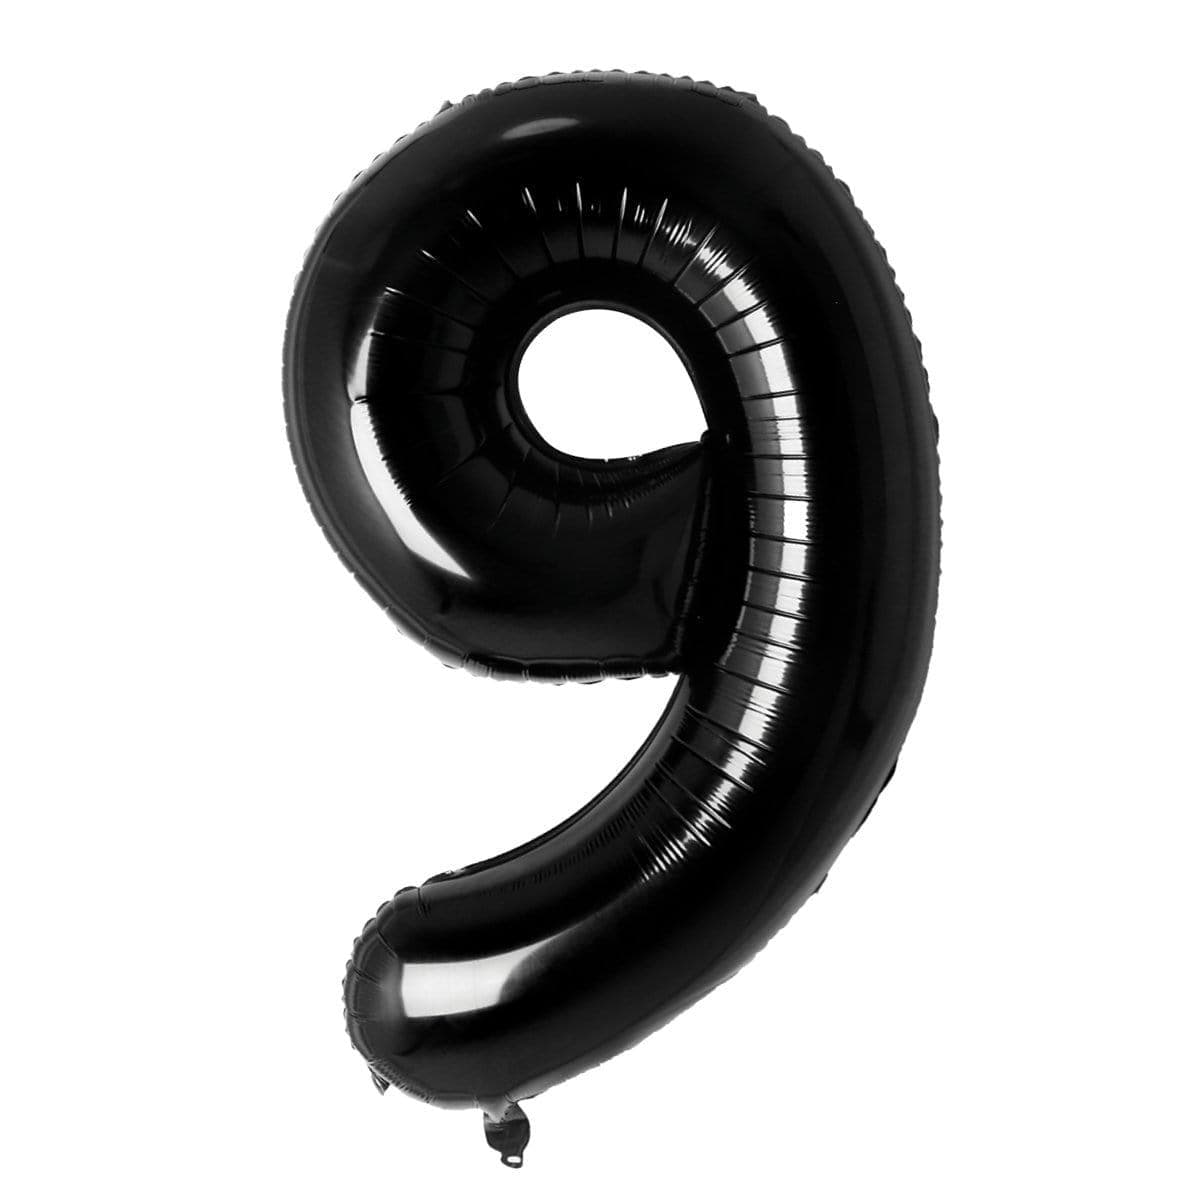 Buy Balloons Black Number 9 Foil Balloon, 34 Inches sold at Party Expert